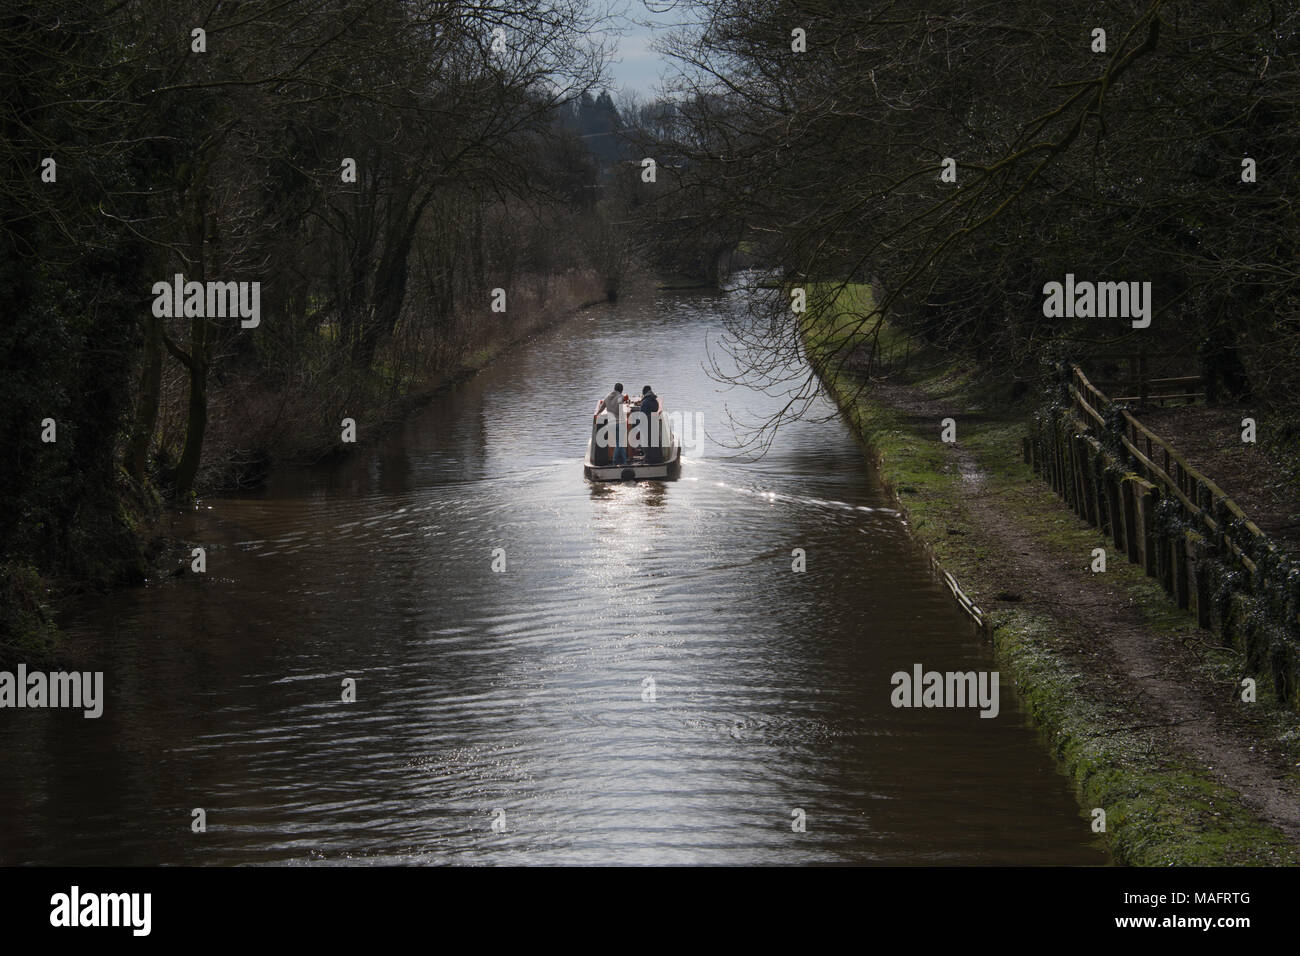 Staffordshire, UK - April 1st 2018 - a scenic view of a  narrowboat on a canal travelling away from the viewer into the sunlight with two young people Stock Photo